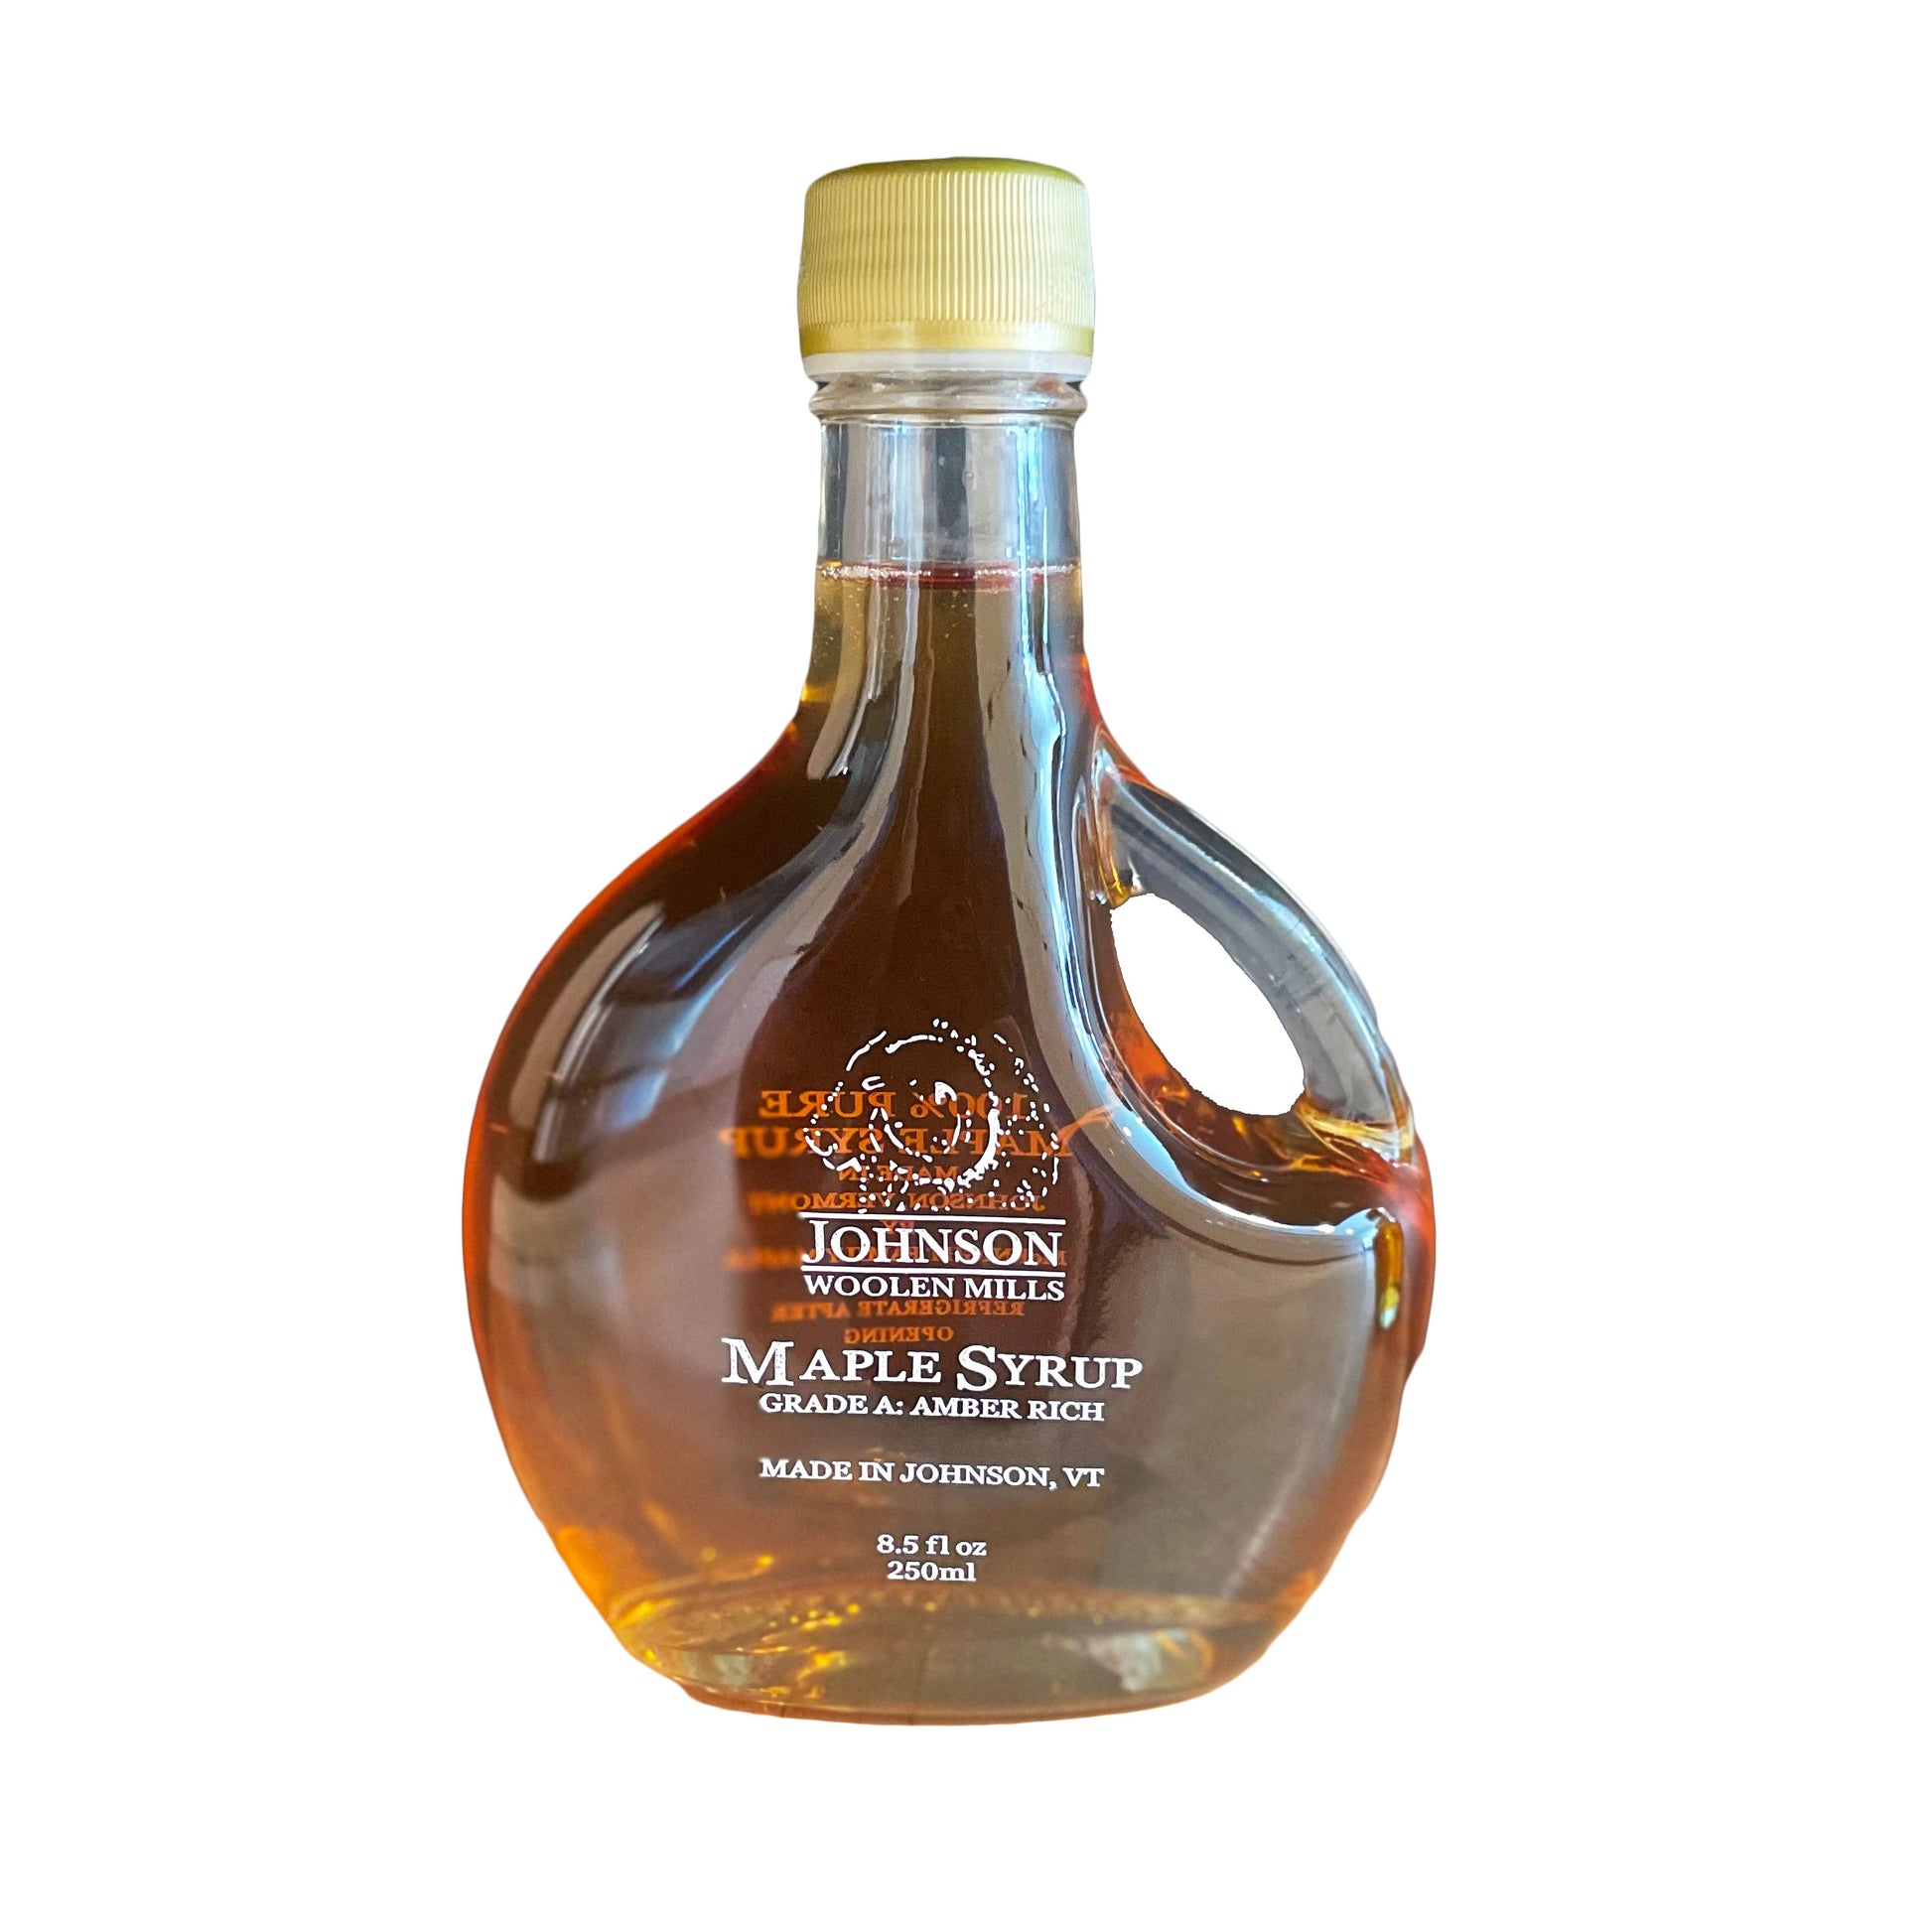 Johnson Maple Syrup in glass round bottle